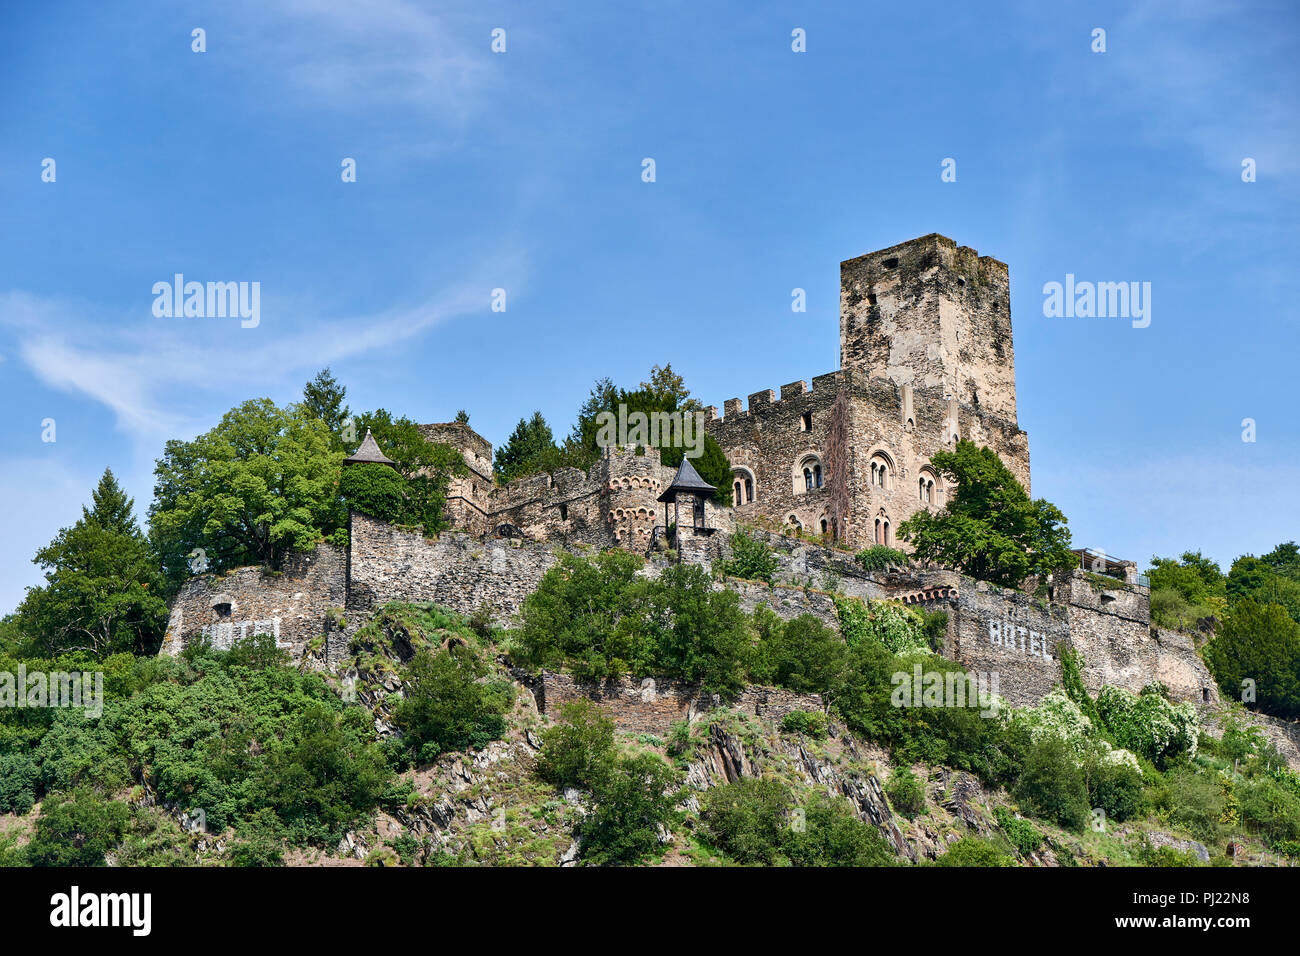 Gutenfels Castle (Burg Gutenfels), also known as Caub Castle, 110m above the town of Kaub in Rhineland-Palatinate, Germany, built in 1220 Stock Photo